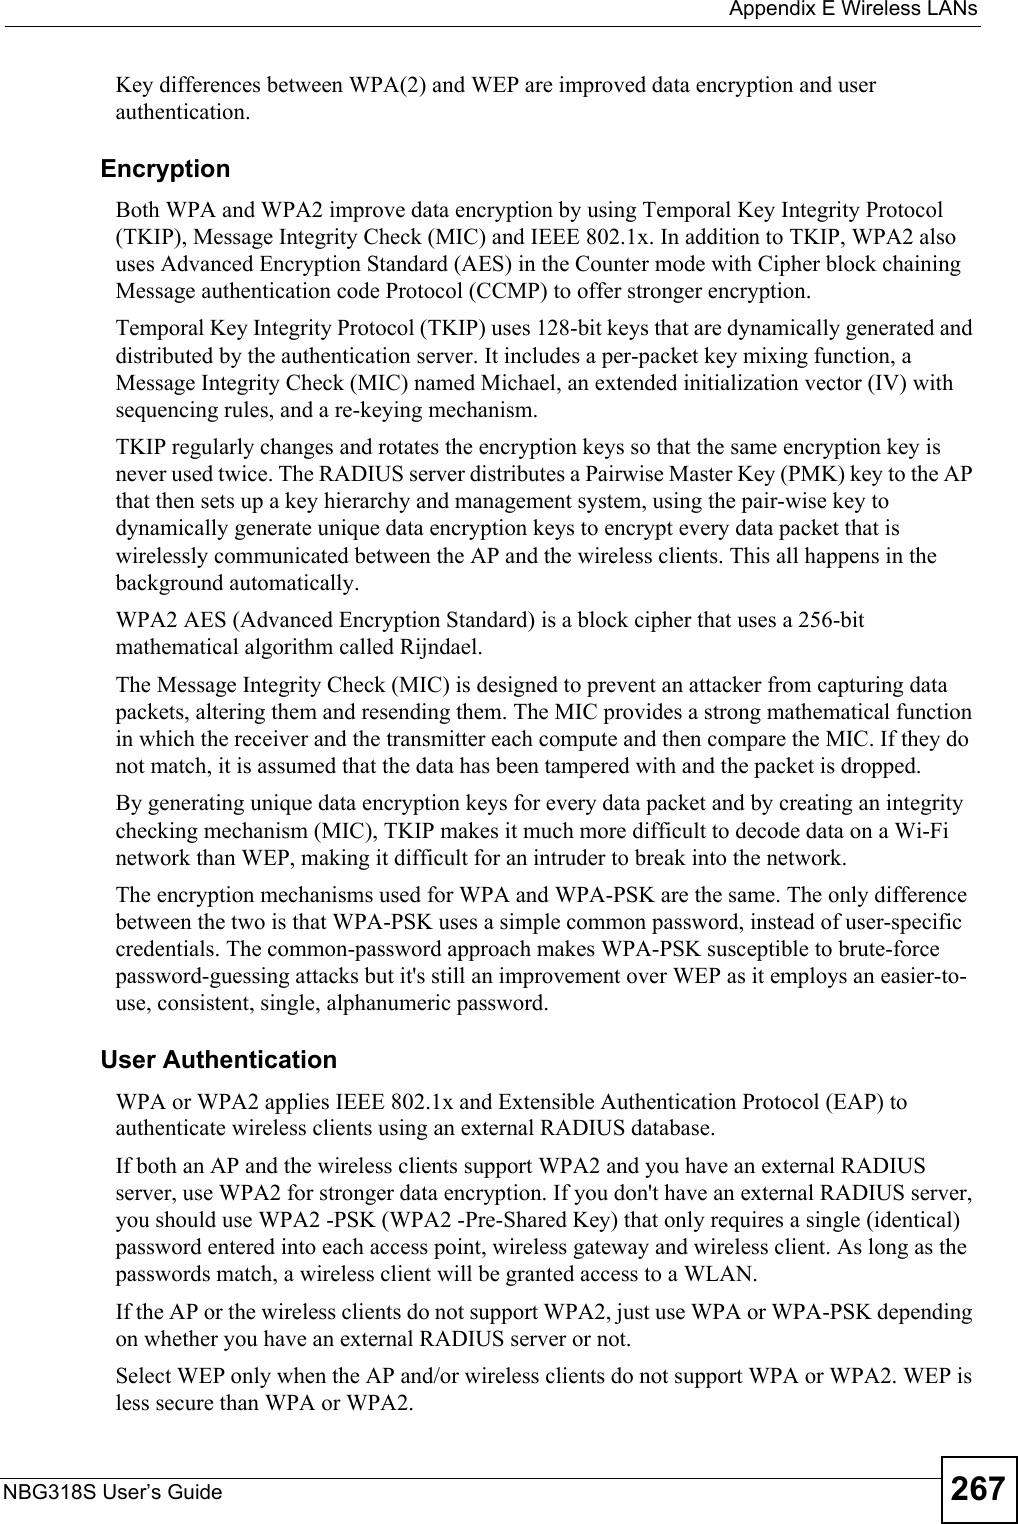  Appendix E Wireless LANsNBG318S User’s Guide 267Key differences between WPA(2) and WEP are improved data encryption and user authentication.              EncryptionBoth WPA and WPA2 improve data encryption by using Temporal Key Integrity Protocol (TKIP), Message Integrity Check (MIC) and IEEE 802.1x. In addition to TKIP, WPA2 also uses Advanced Encryption Standard (AES) in the Counter mode with Cipher block chaining Message authentication code Protocol (CCMP) to offer stronger encryption. Temporal Key Integrity Protocol (TKIP) uses 128-bit keys that are dynamically generated and distributed by the authentication server. It includes a per-packet key mixing function, a Message Integrity Check (MIC) named Michael, an extended initialization vector (IV) with sequencing rules, and a re-keying mechanism.TKIP regularly changes and rotates the encryption keys so that the same encryption key is never used twice. The RADIUS server distributes a Pairwise Master Key (PMK) key to the AP that then sets up a key hierarchy and management system, using the pair-wise key to dynamically generate unique data encryption keys to encrypt every data packet that is wirelessly communicated between the AP and the wireless clients. This all happens in the background automatically.WPA2 AES (Advanced Encryption Standard) is a block cipher that uses a 256-bit mathematical algorithm called Rijndael.The Message Integrity Check (MIC) is designed to prevent an attacker from capturing data packets, altering them and resending them. The MIC provides a strong mathematical function in which the receiver and the transmitter each compute and then compare the MIC. If they do not match, it is assumed that the data has been tampered with and the packet is dropped. By generating unique data encryption keys for every data packet and by creating an integrity checking mechanism (MIC), TKIP makes it much more difficult to decode data on a Wi-Fi network than WEP, making it difficult for an intruder to break into the network. The encryption mechanisms used for WPA and WPA-PSK are the same. The only difference between the two is that WPA-PSK uses a simple common password, instead of user-specific credentials. The common-password approach makes WPA-PSK susceptible to brute-force password-guessing attacks but it&apos;s still an improvement over WEP as it employs an easier-to-use, consistent, single, alphanumeric password.              User AuthenticationWPA or WPA2 applies IEEE 802.1x and Extensible Authentication Protocol (EAP) to authenticate wireless clients using an external RADIUS database. If both an AP and the wireless clients support WPA2 and you have an external RADIUS server, use WPA2 for stronger data encryption. If you don&apos;t have an external RADIUS server, you should use WPA2 -PSK (WPA2 -Pre-Shared Key) that only requires a single (identical) password entered into each access point, wireless gateway and wireless client. As long as the passwords match, a wireless client will be granted access to a WLAN. If the AP or the wireless clients do not support WPA2, just use WPA or WPA-PSK depending on whether you have an external RADIUS server or not.Select WEP only when the AP and/or wireless clients do not support WPA or WPA2. WEP is less secure than WPA or WPA2.